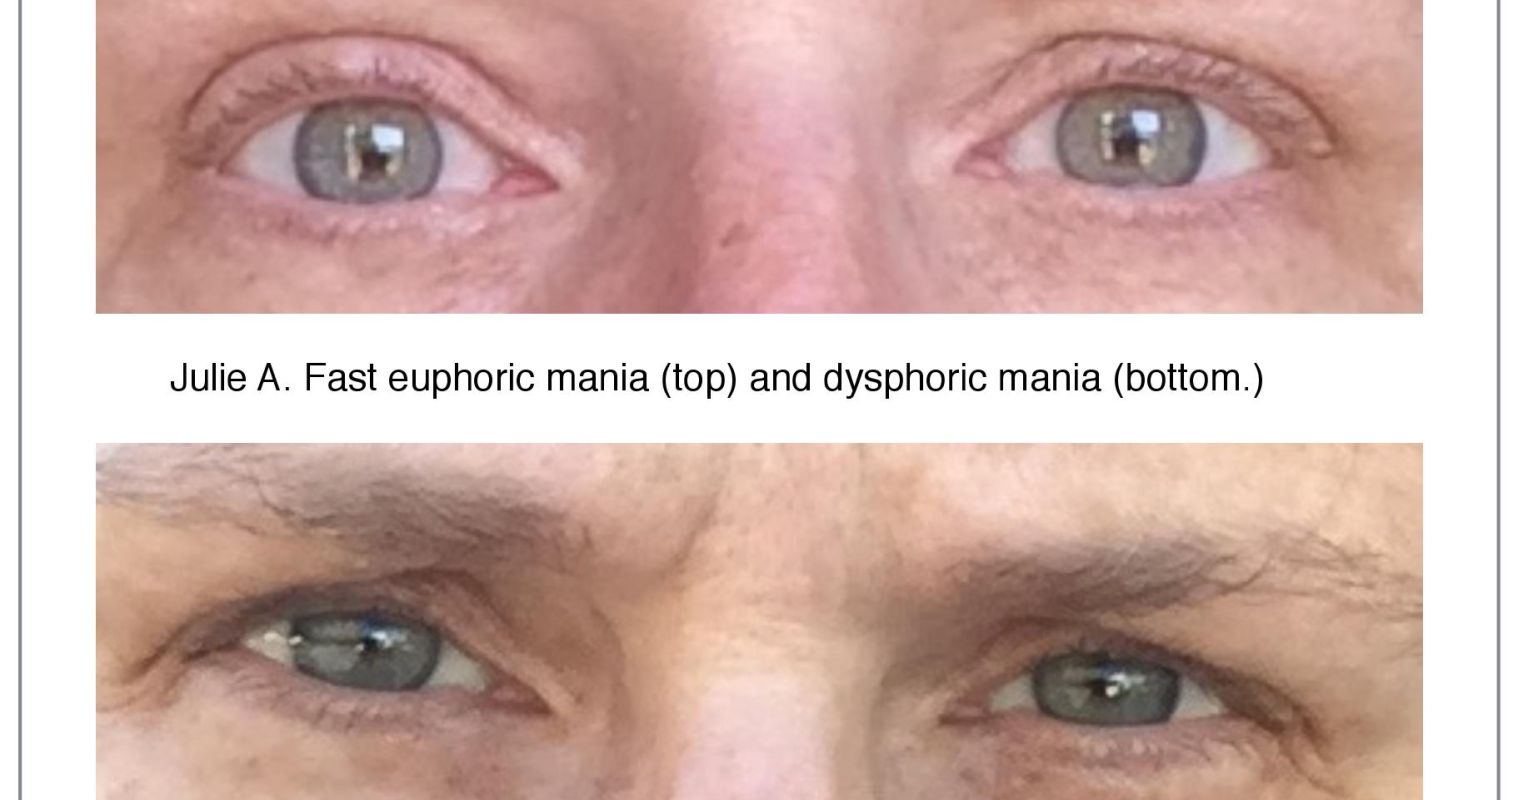 3 Clues to Recognize Bipolar Disorder Mania in the Eyes